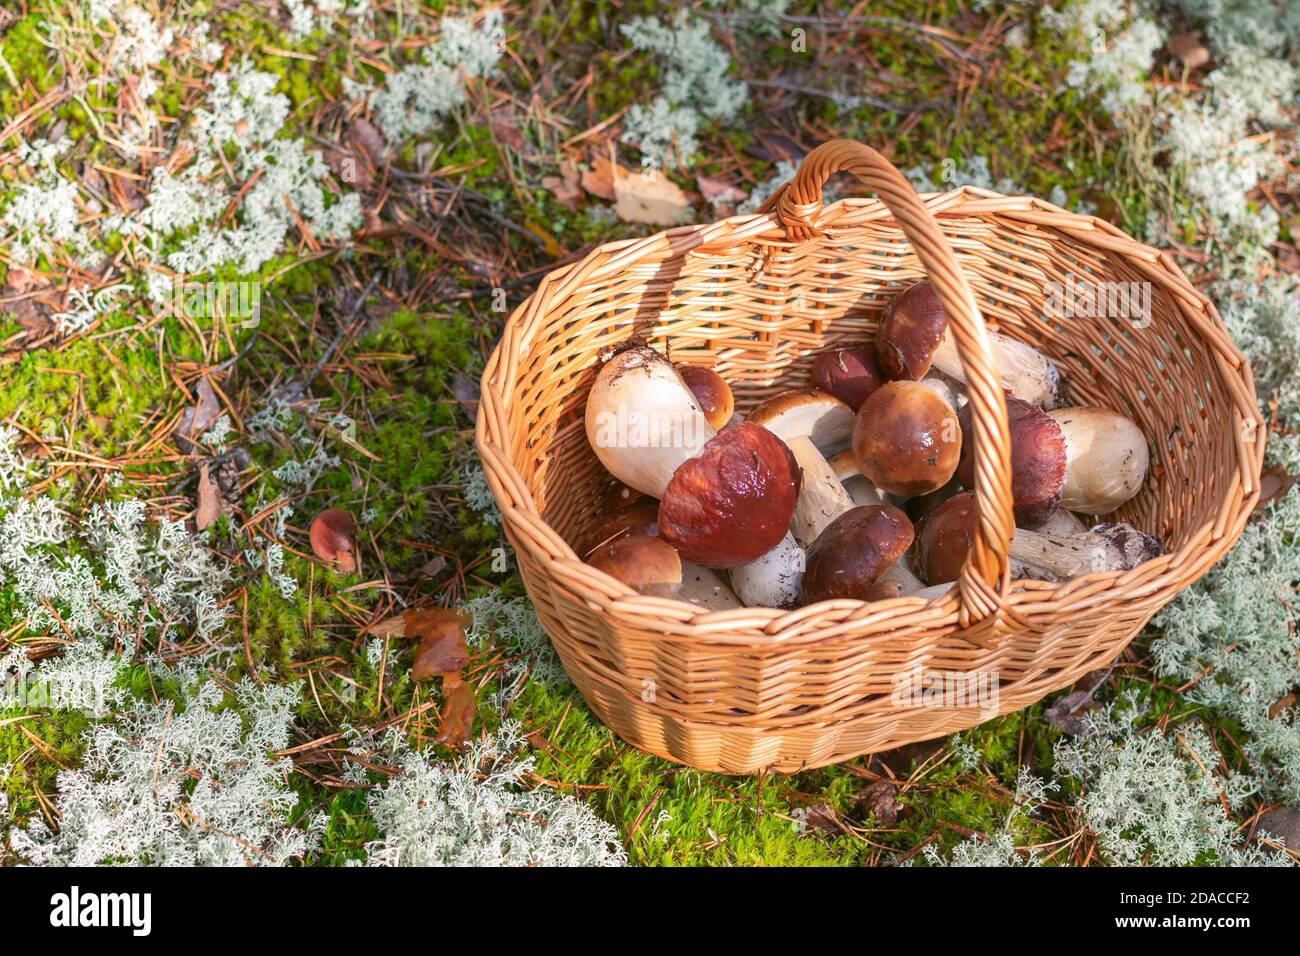 Wicker basket with picked pine boletes or pinewood king boletes (Boletus pinophilus) on the mossy ground in the forest at sunny autumn day Stock Photo